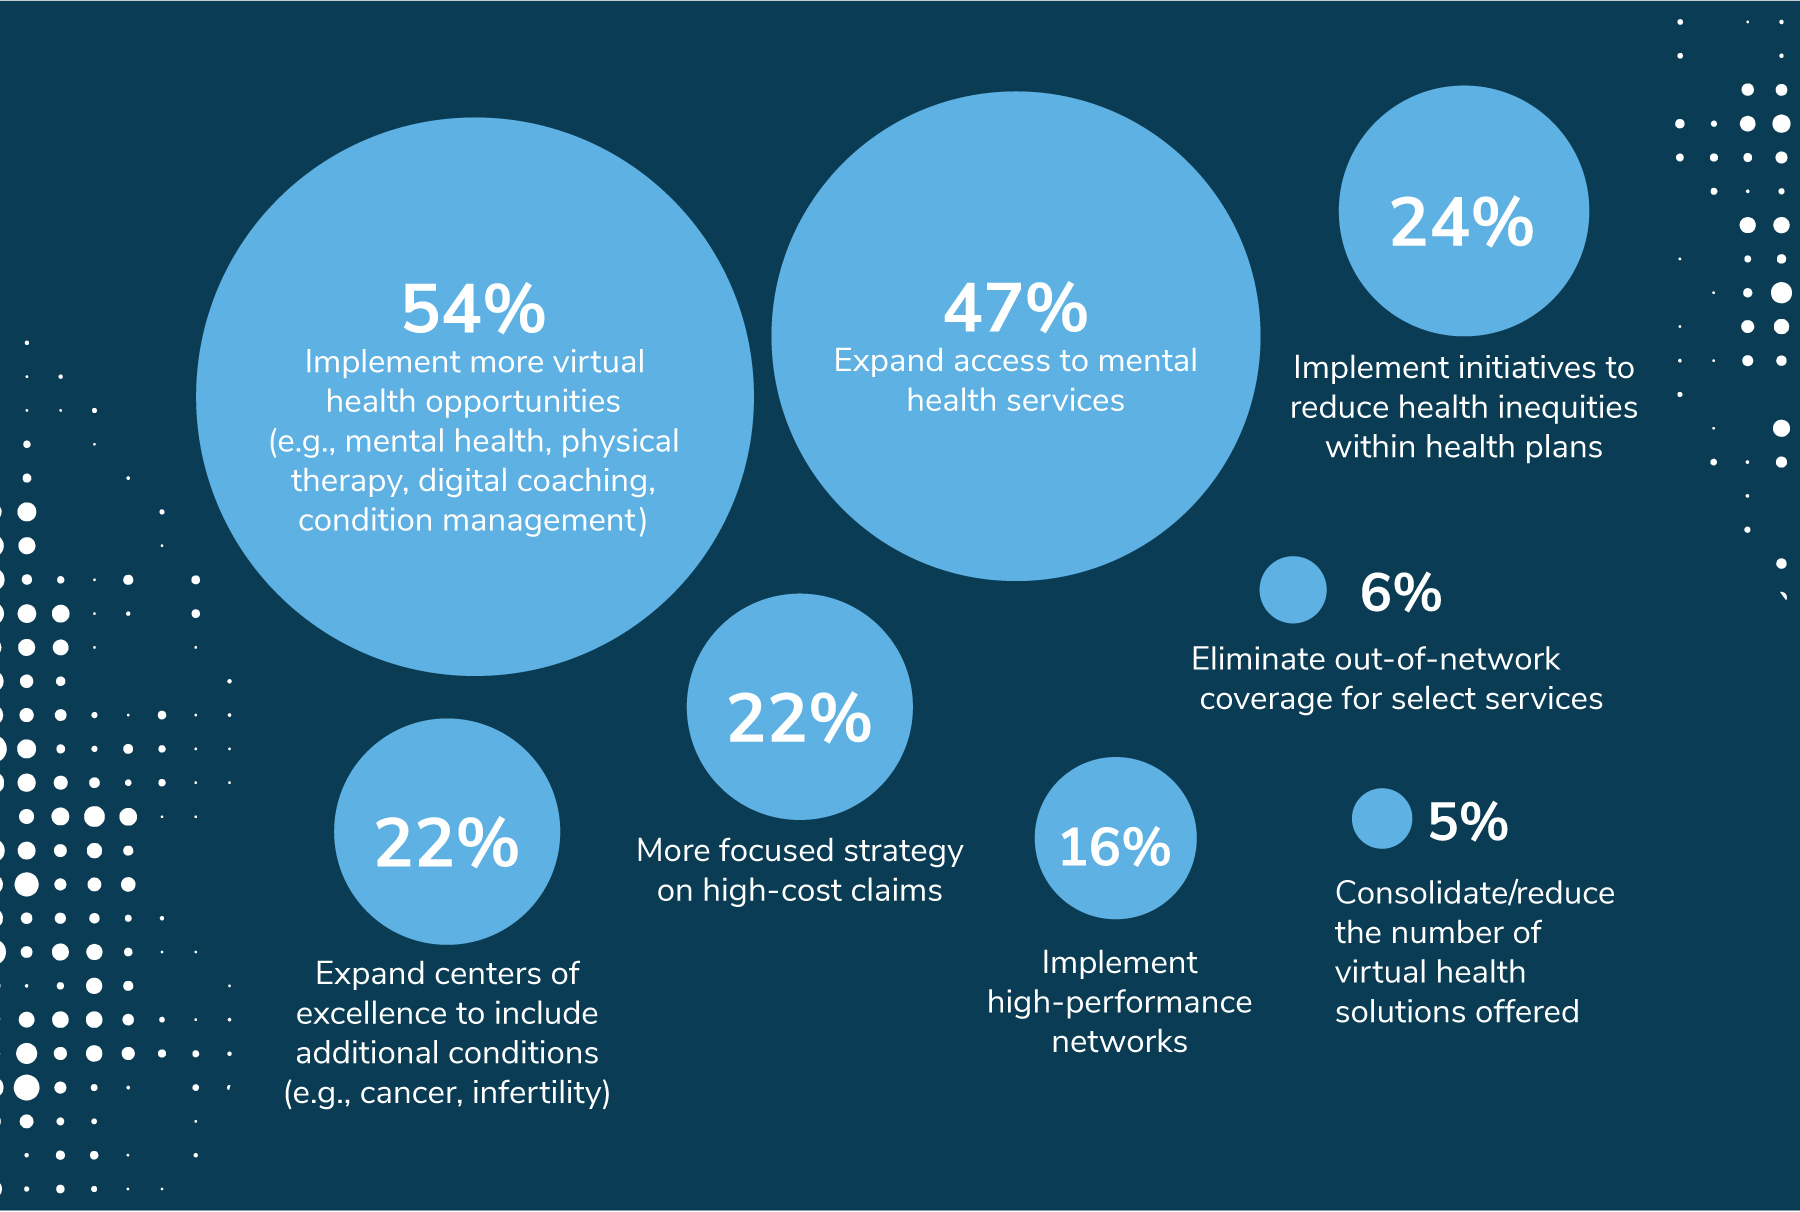 In 2023, employers will implement more virtual health opportunities (54%), expand access to mental health services (47%), and implement initiatives to reduce health inequities (24%). 